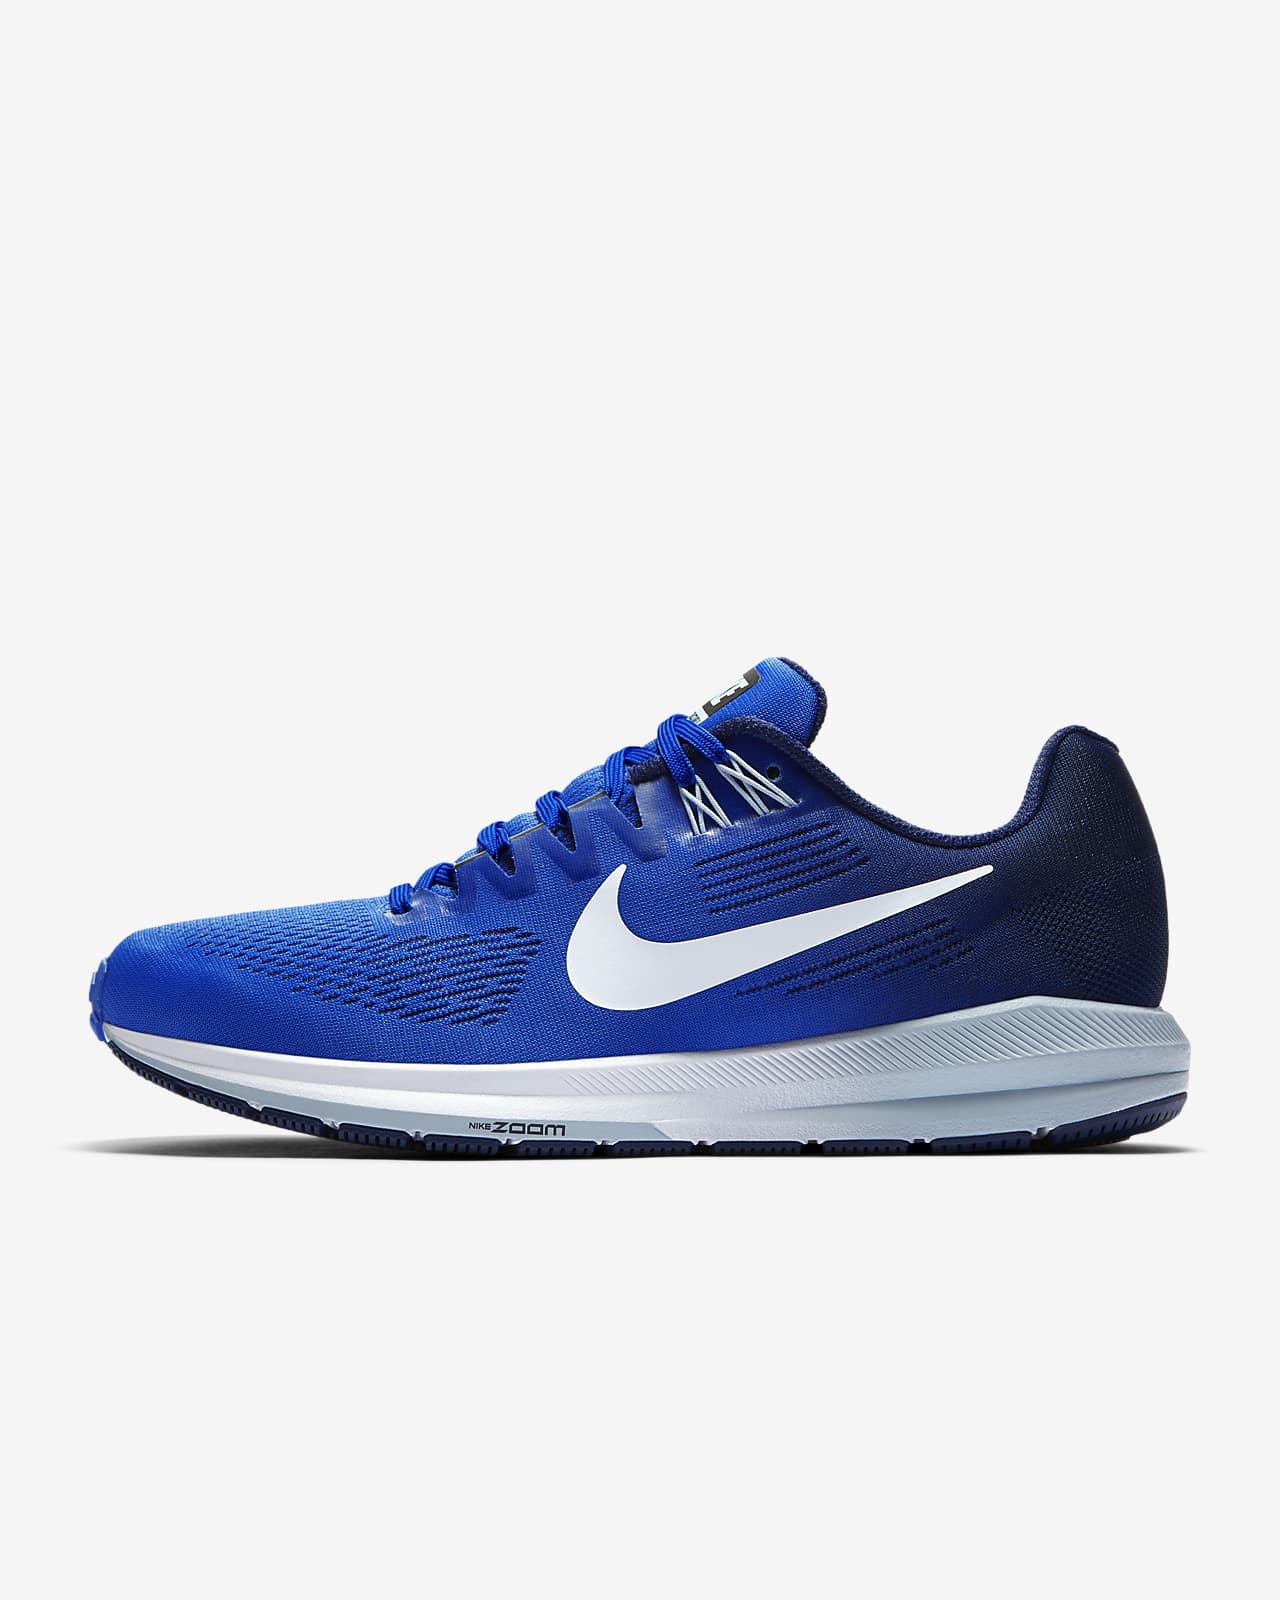 nike structure 21 men's